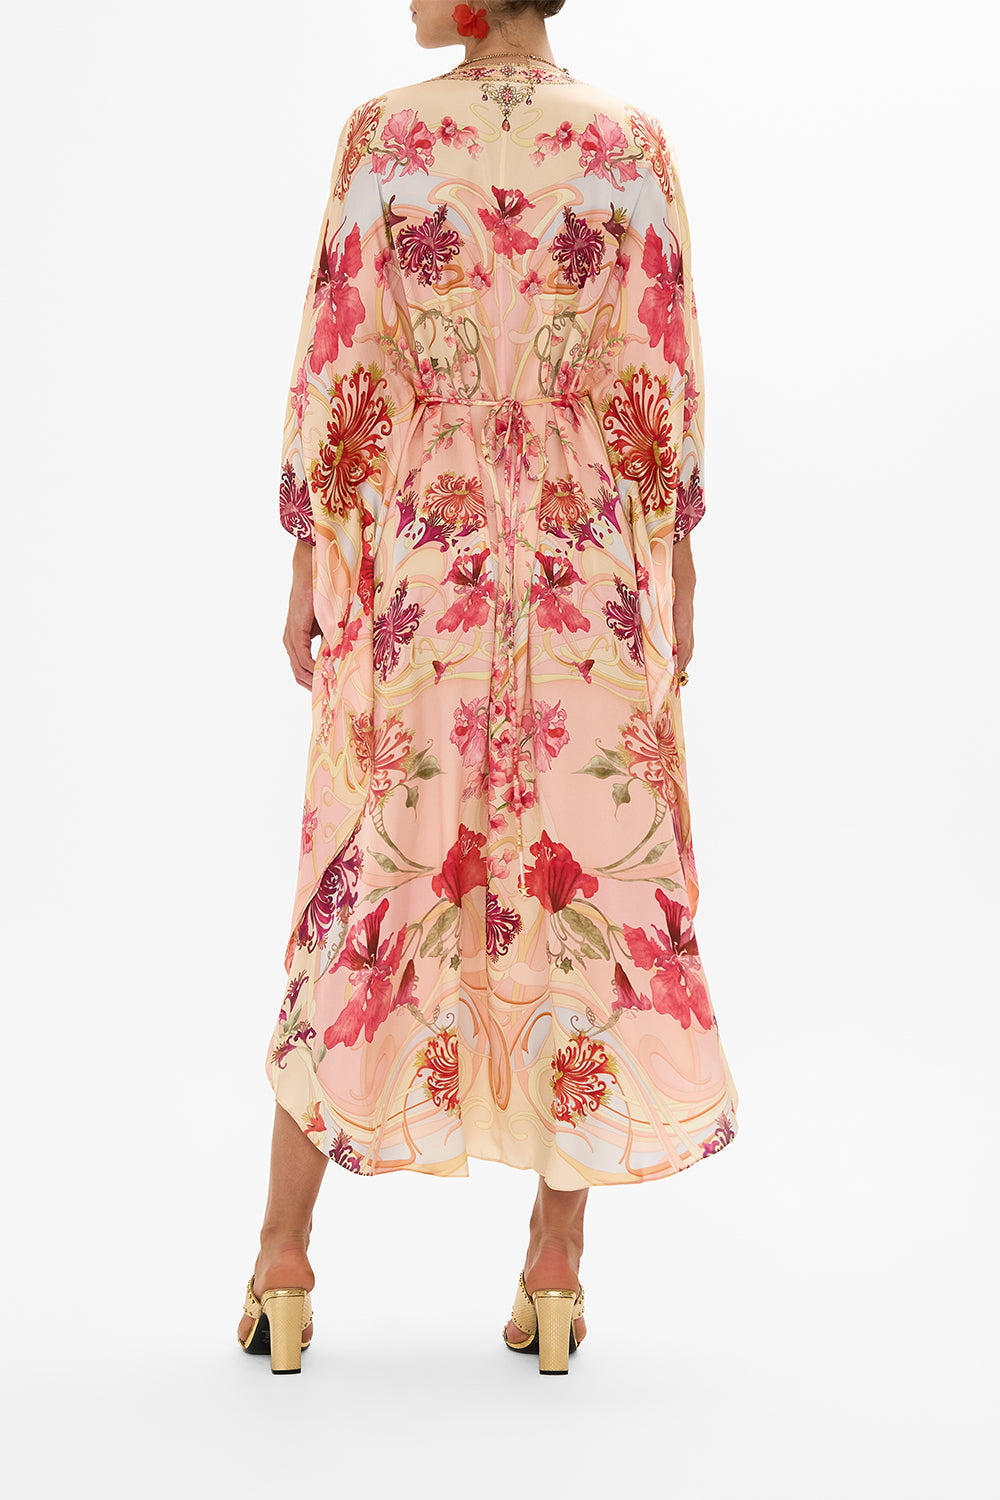 CAMILLA Floral Gathered Waist Kaftan in Blossoms and Brushstrokes print